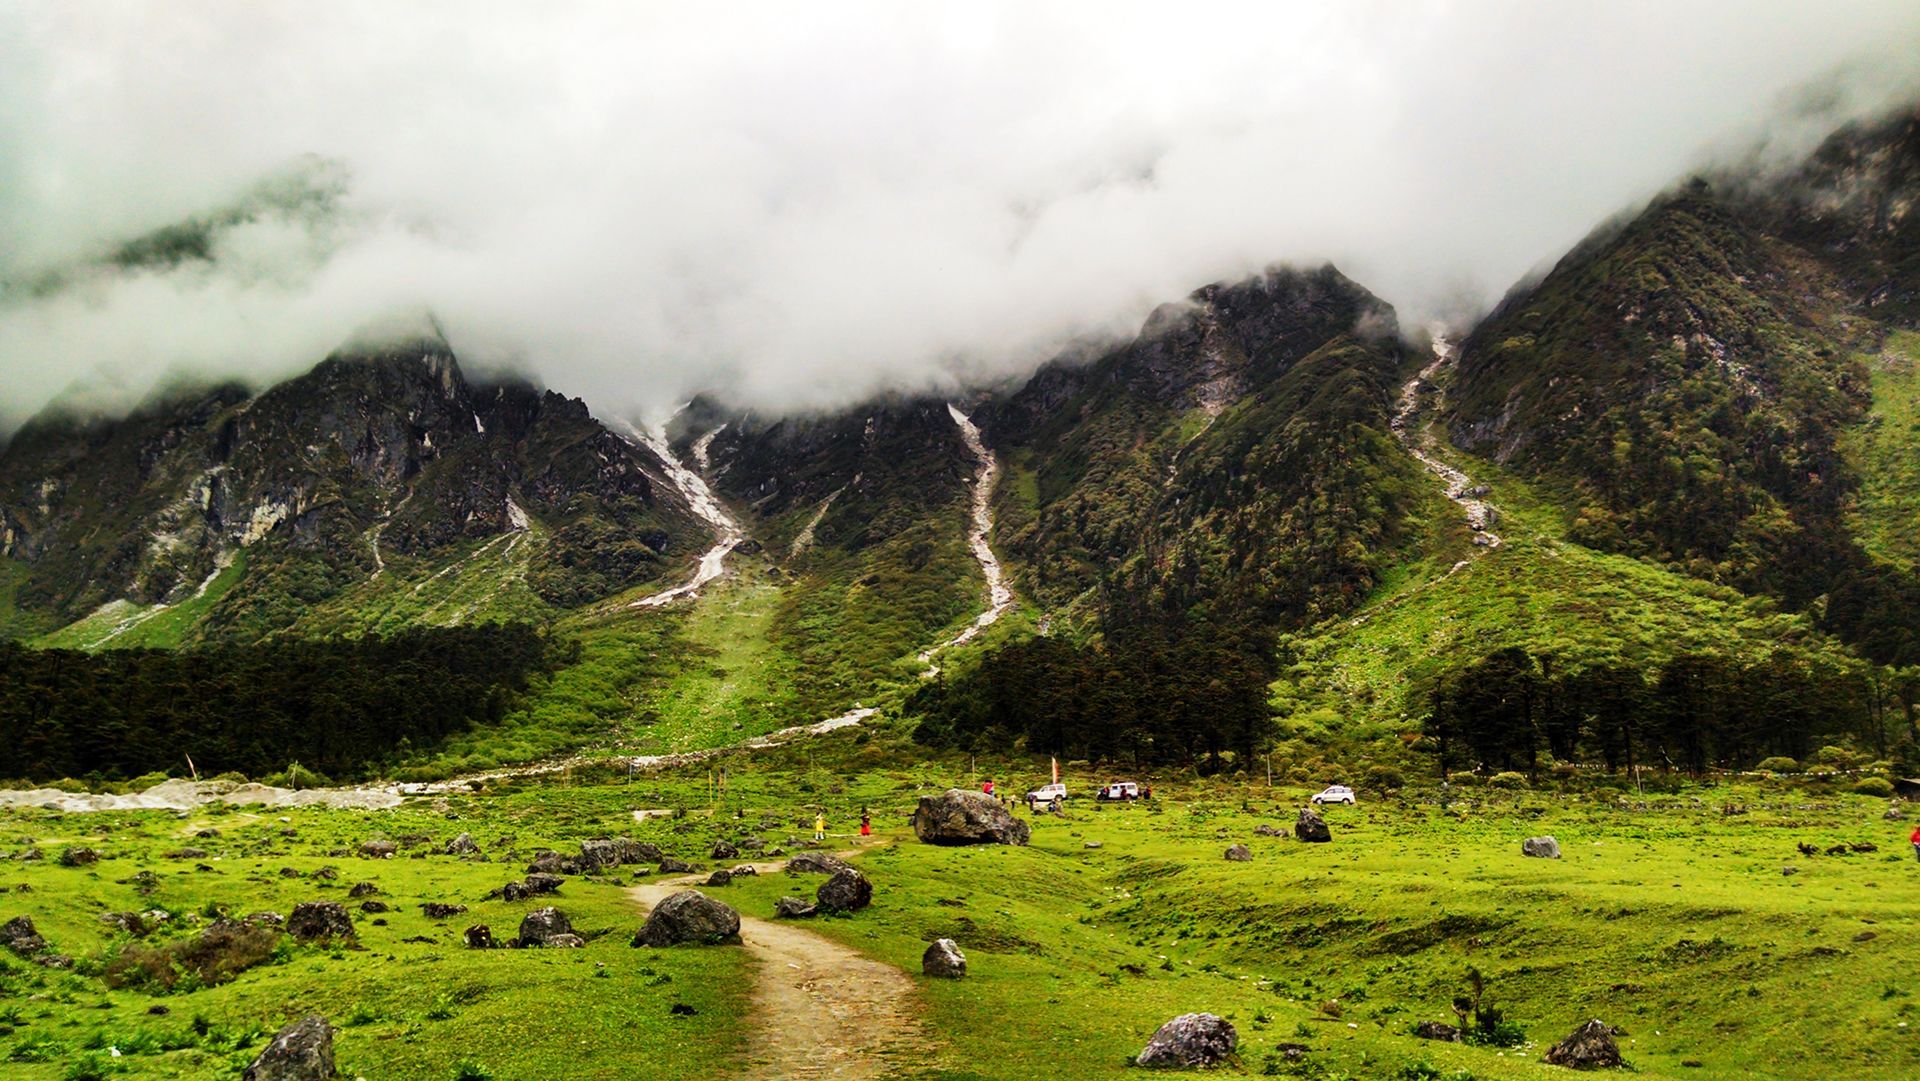 OC] Yumthang Valley, Sikkim, India [1920 x 1080] #reddit